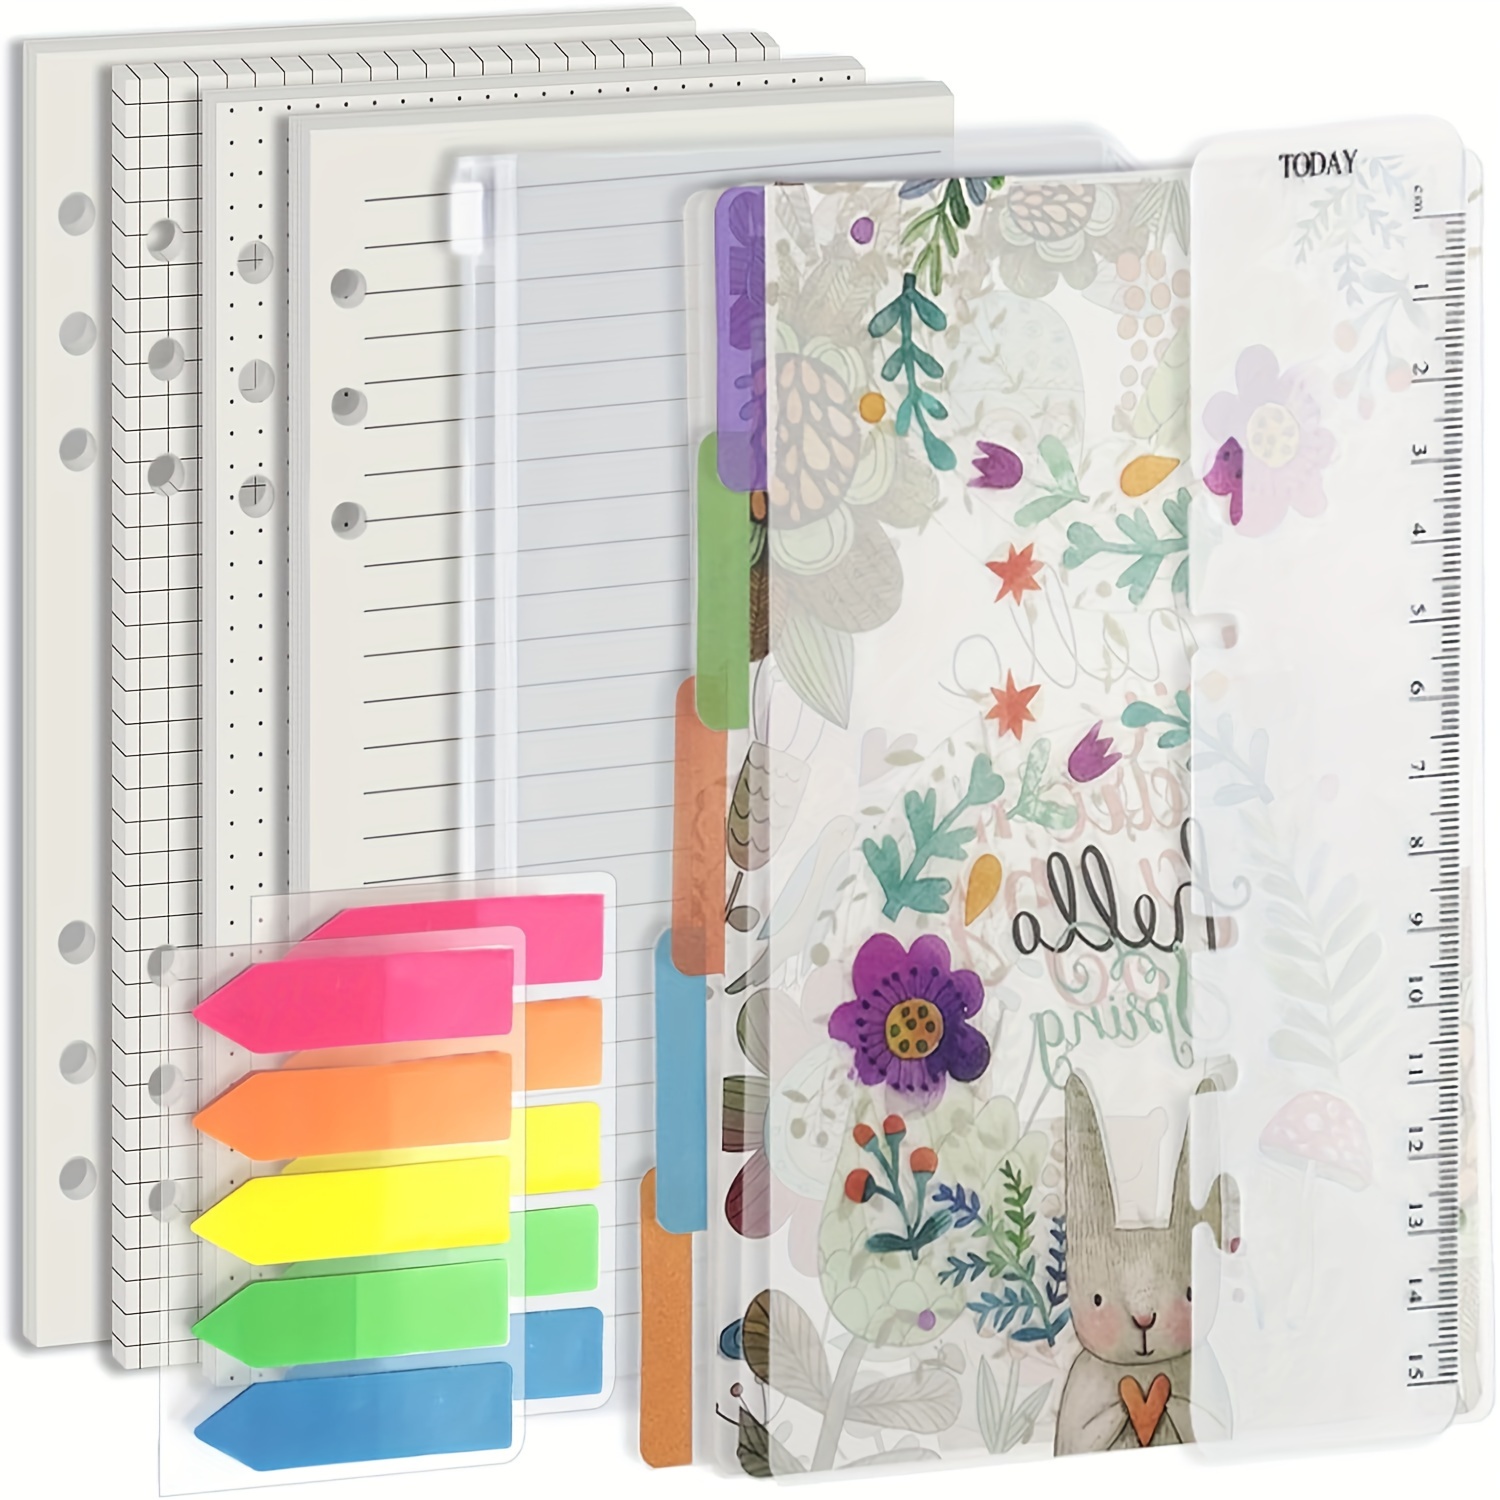 

A6 Planner Refill Kit - 160 Pages (80 Sheets) With Dot, Line & Grid Options For 6-ring Binders, Durable 100 Gsm Paper, Bonus Gifts Included